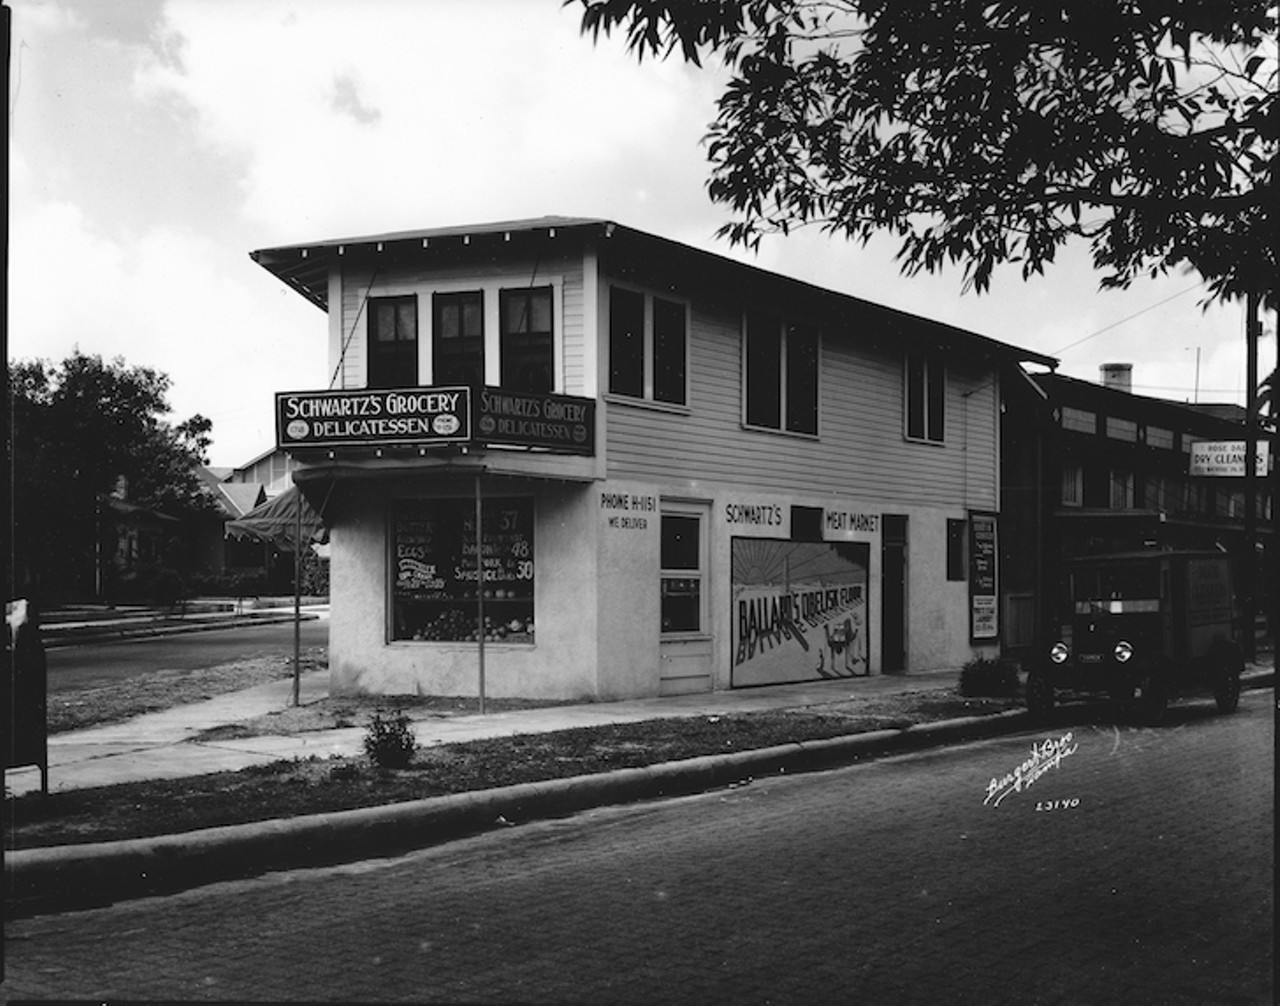 THEN
Schwartz&#146;s Grocery and apartment 
1718 Watrous Avenue, 1927. 
Neighborhood grocery stores were once very popular prior to having a car for every home, allowing residents close proximity to goods.  The first Schwartz&#146;s grocery opened on Lafayette Street (now Kennedy Boulevard) in 1907 and in 1914 moved to 7th Avenue in thriving Ybor City. While the Hispanic heritage of Ybor City is widely publicized, there was a strong Jewish community opening retail outlets in the area. Claiming to be the only one of its kind in South Florida, the Jewish delicatessen and grocery served as a true mom-and-pop store for Ybor City. Pastroma, salami, dill pickles, and salt herring were all available in the store and by mail order. In 1915, the store&#146;s name changed to HW Schwartz Grocery and Delicatessen. In 1916 tragedy struck as the patriarch of the family, Herman Schwartz, was killed in a trolley accident.